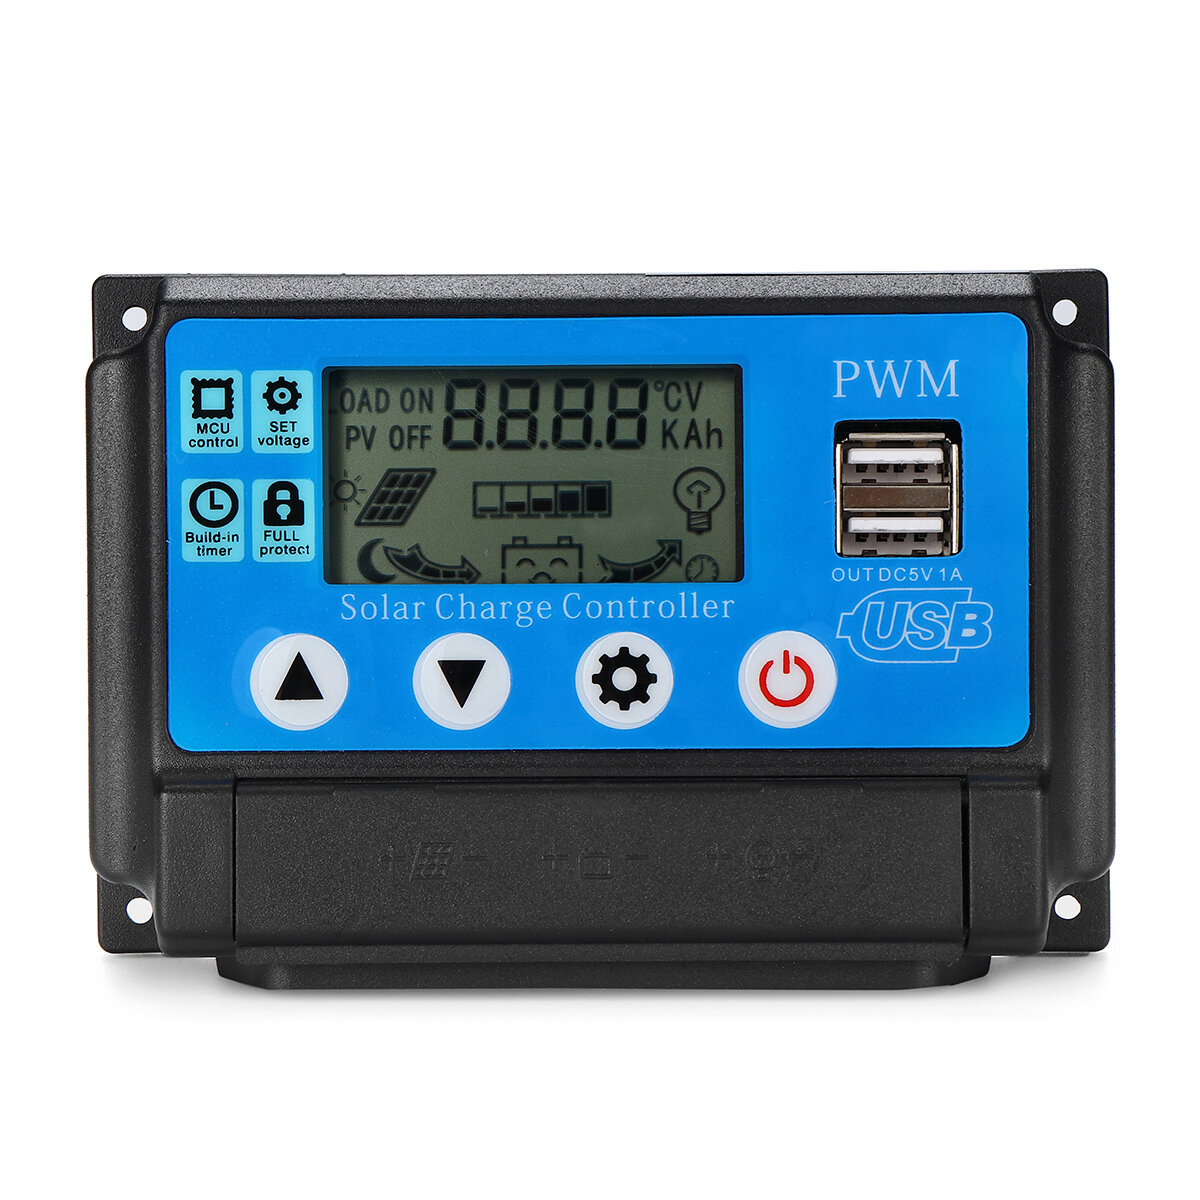 best price,pwm,60a,12/24v,solar,charge,controller,discount